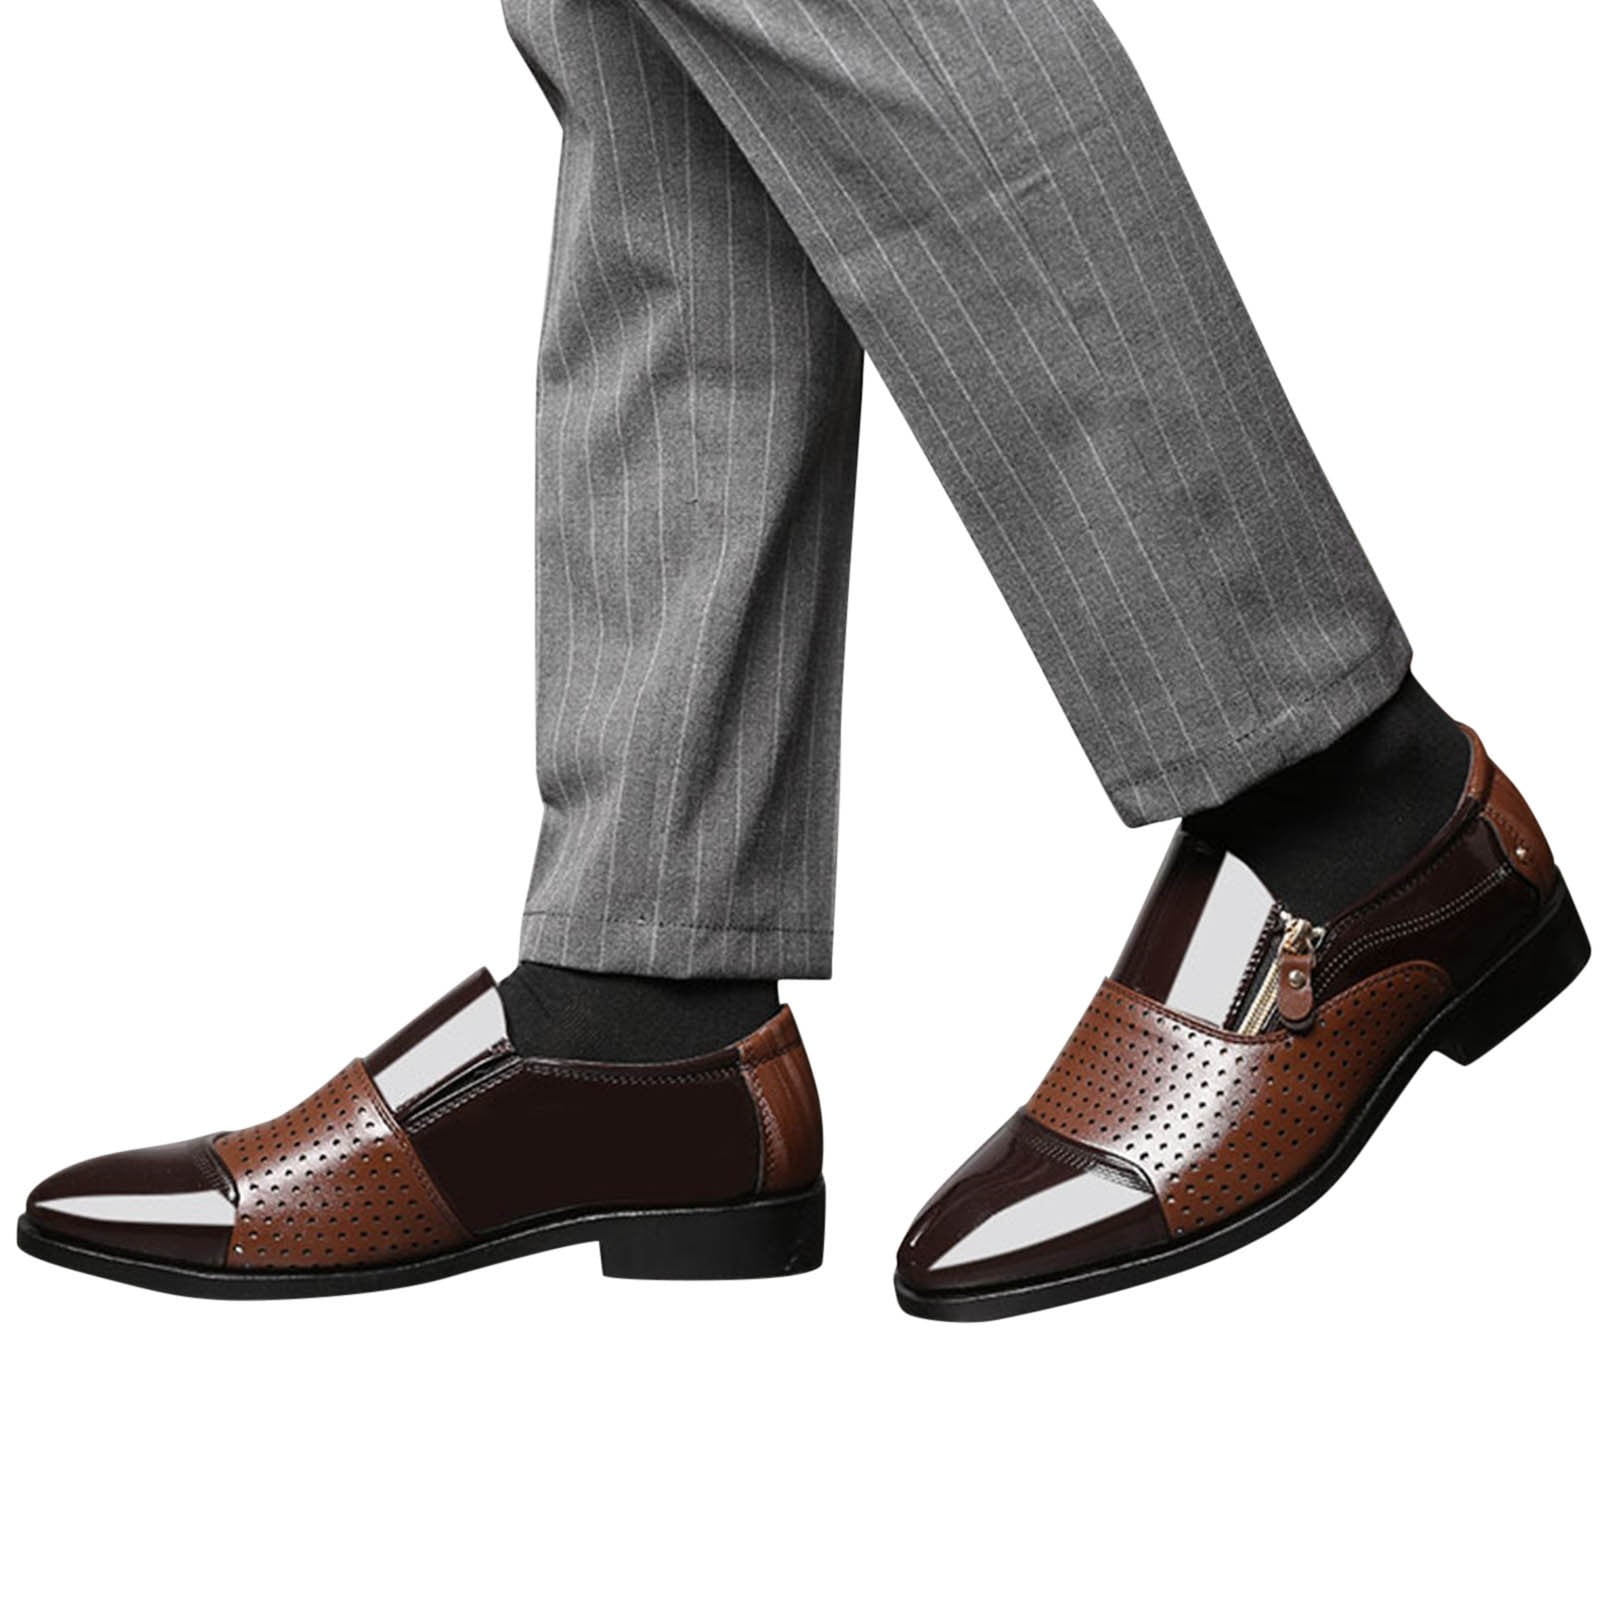 brown leather dress shoes